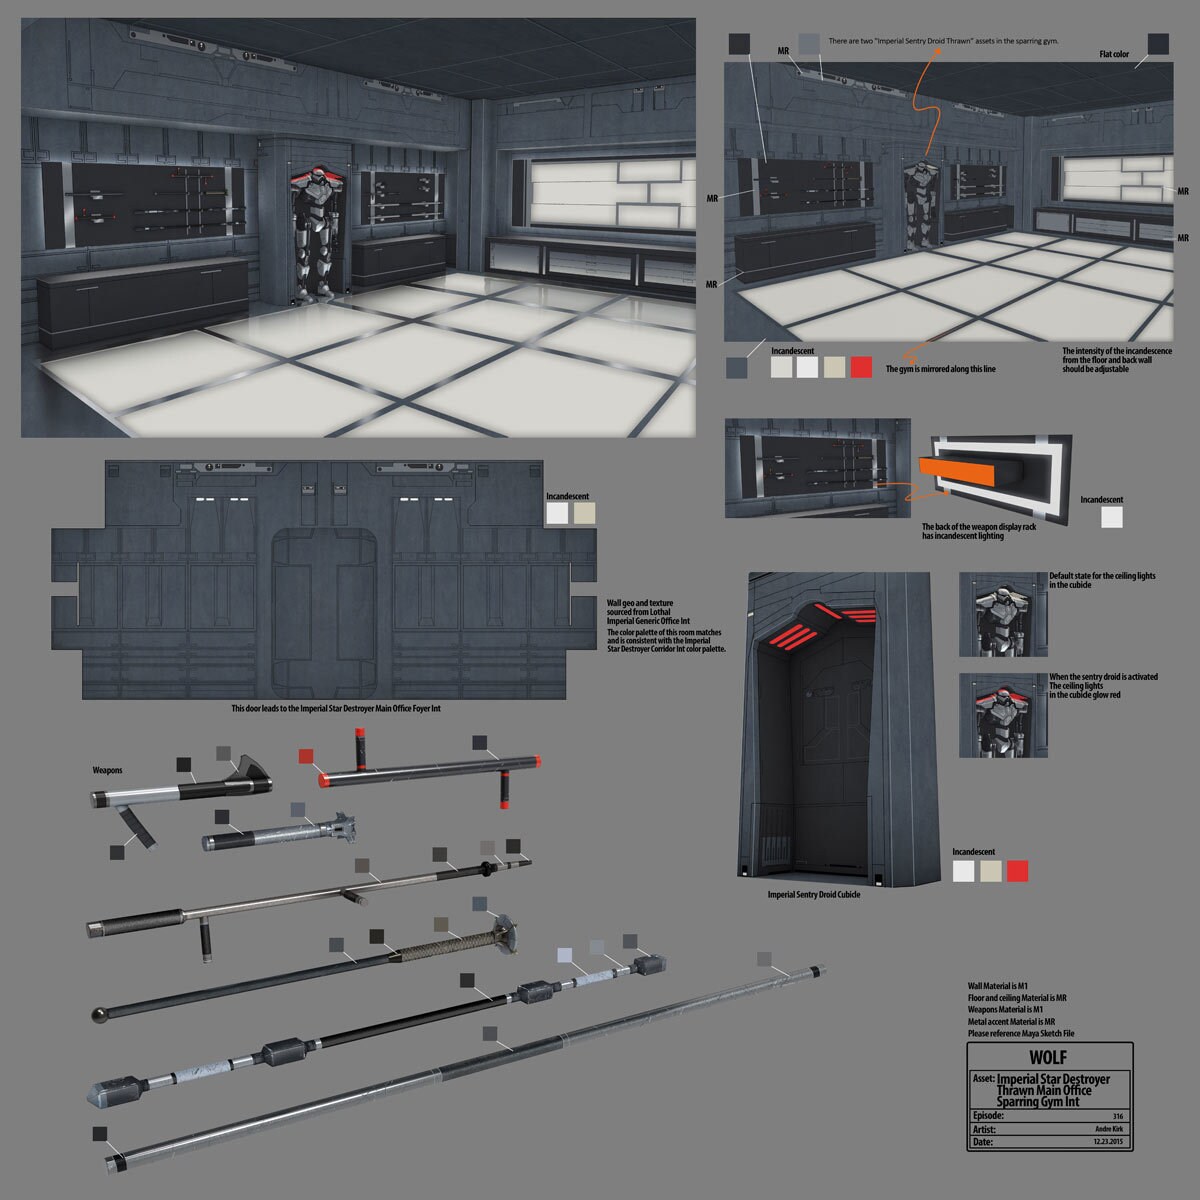 Thrawn's sparring gym interior concept art by Andre Kirk.